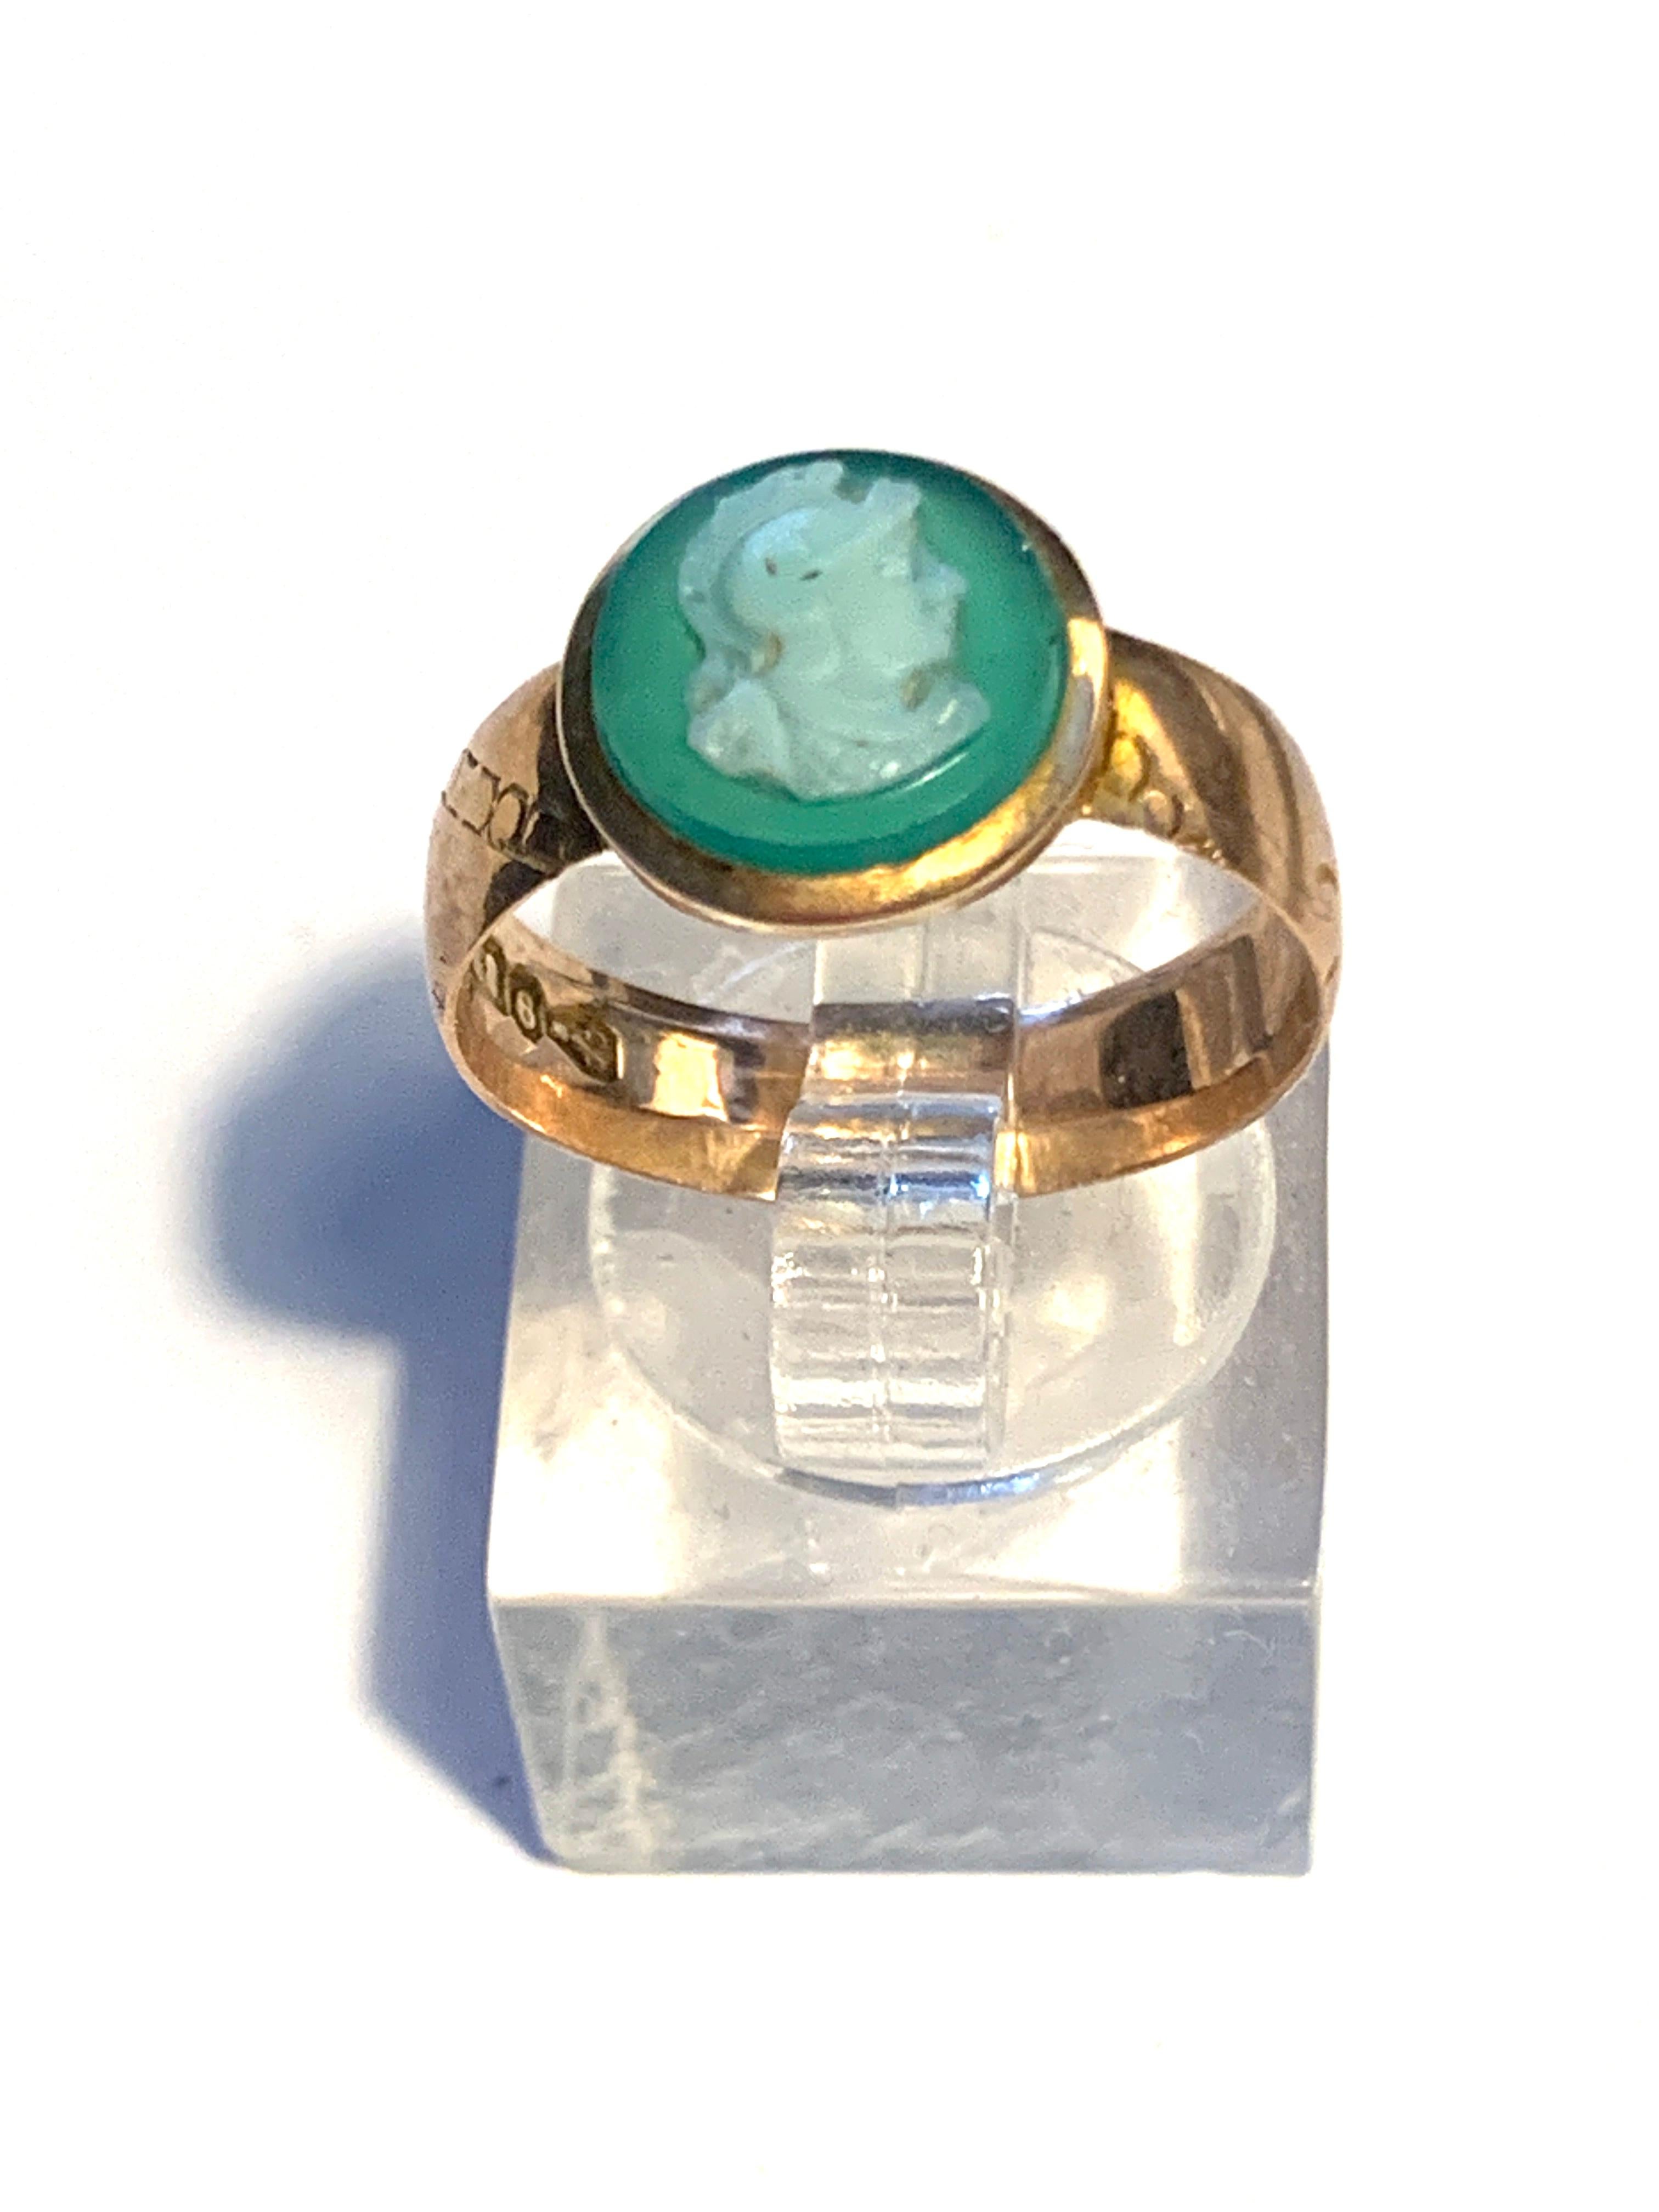 Beautiful Rare 
Antique 
9ct Rose Gold Green Cameo Ring

Fully Hallmarked Chester 1884

Weight - 2.5 grams
Band Thickness - 5 mm

Size U.K. P 1/2
        U.S. 7 3/4